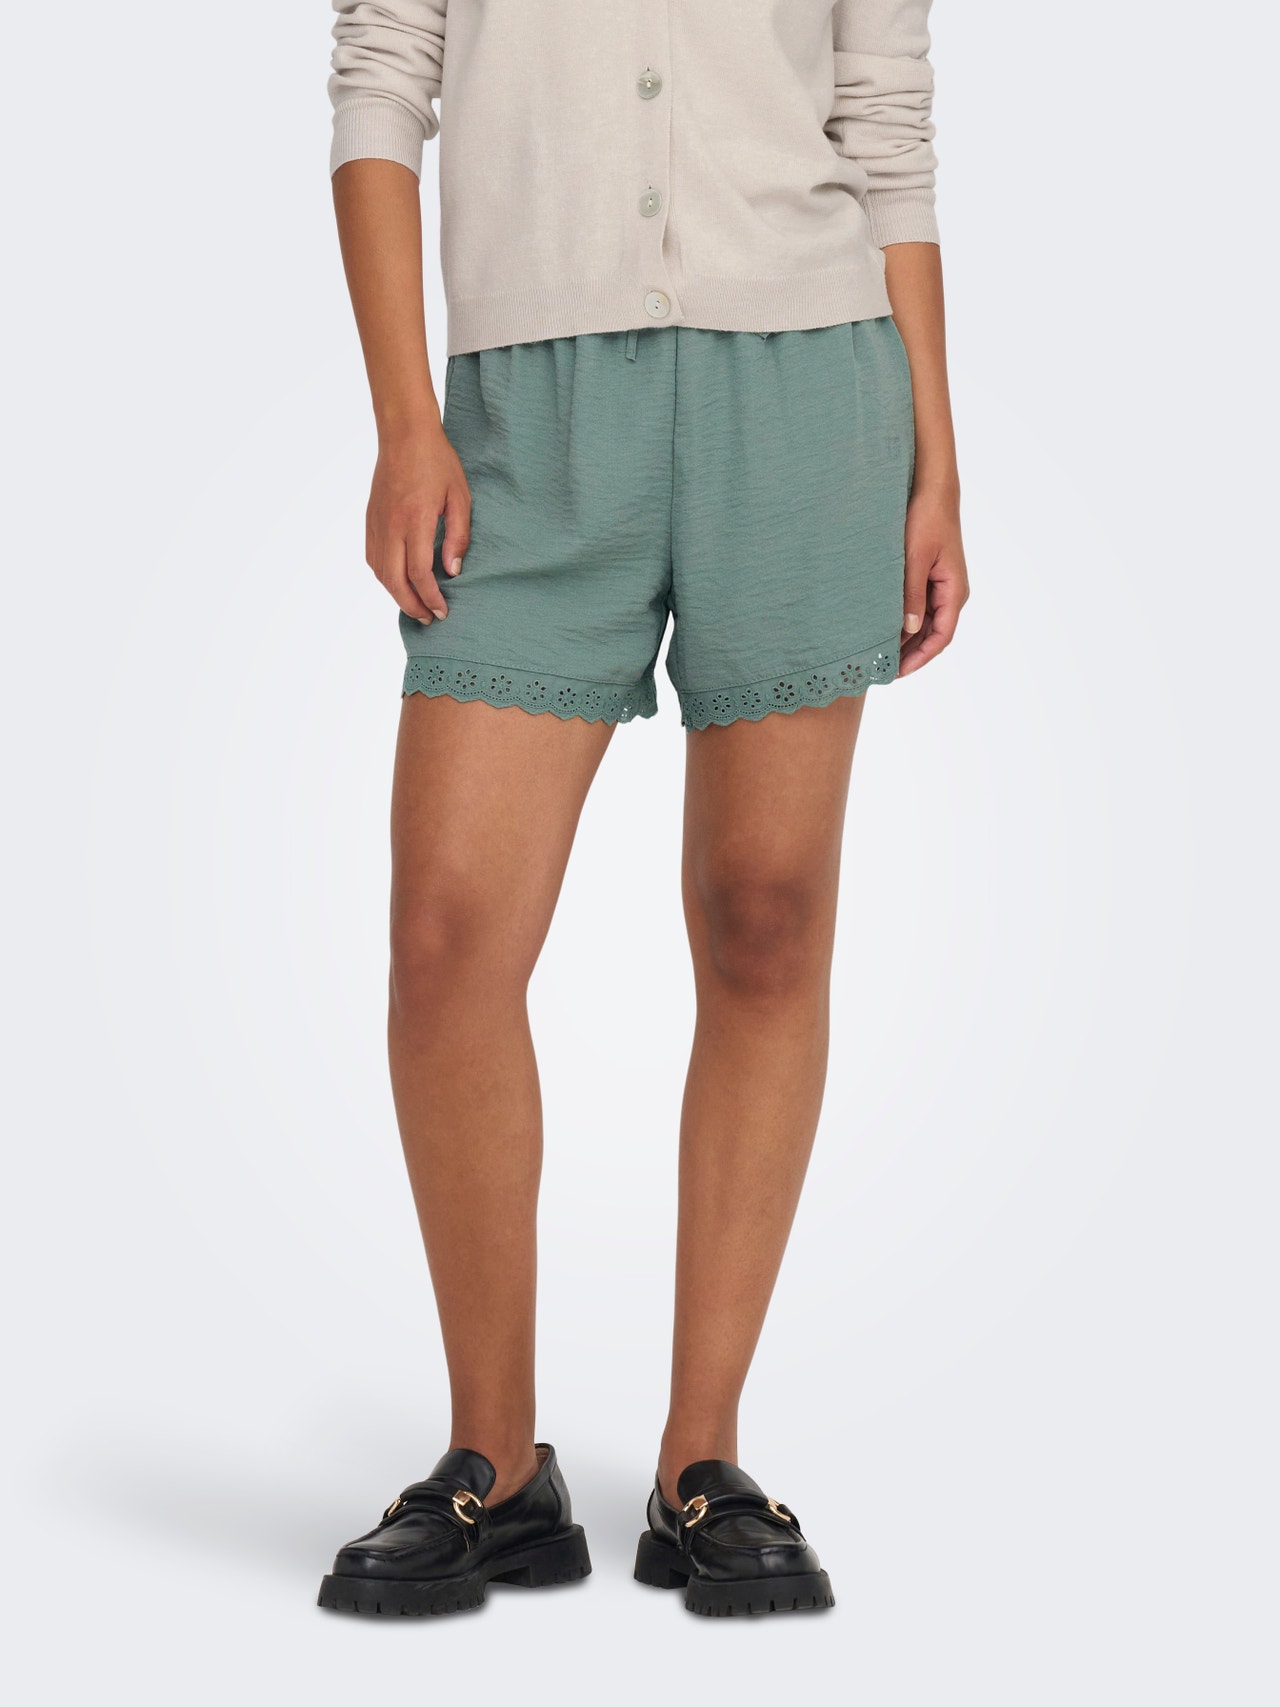 ONLY Shorts With Lace Edge -Chinois Green - 15295675